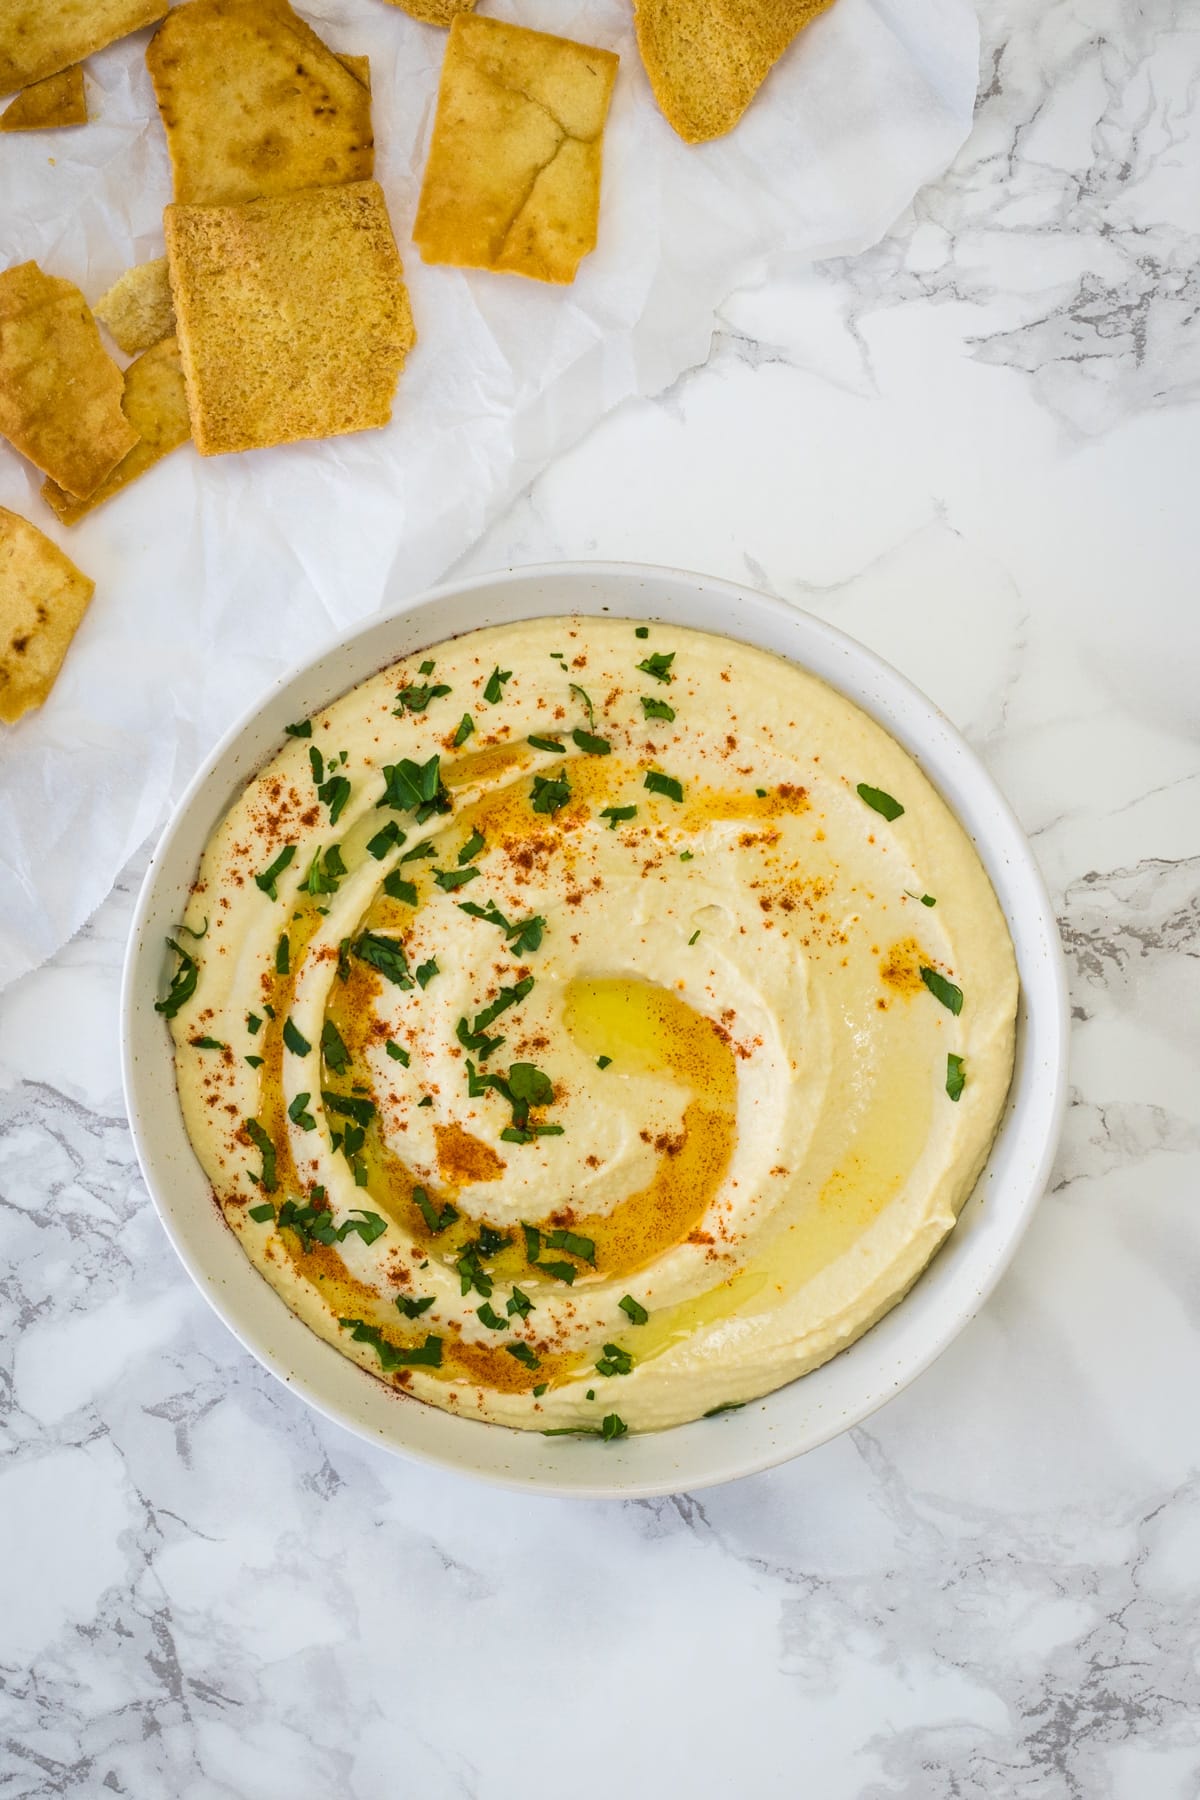 Top view of hummus served in a plate with drizzle of olive oil and paprika, served with chips.